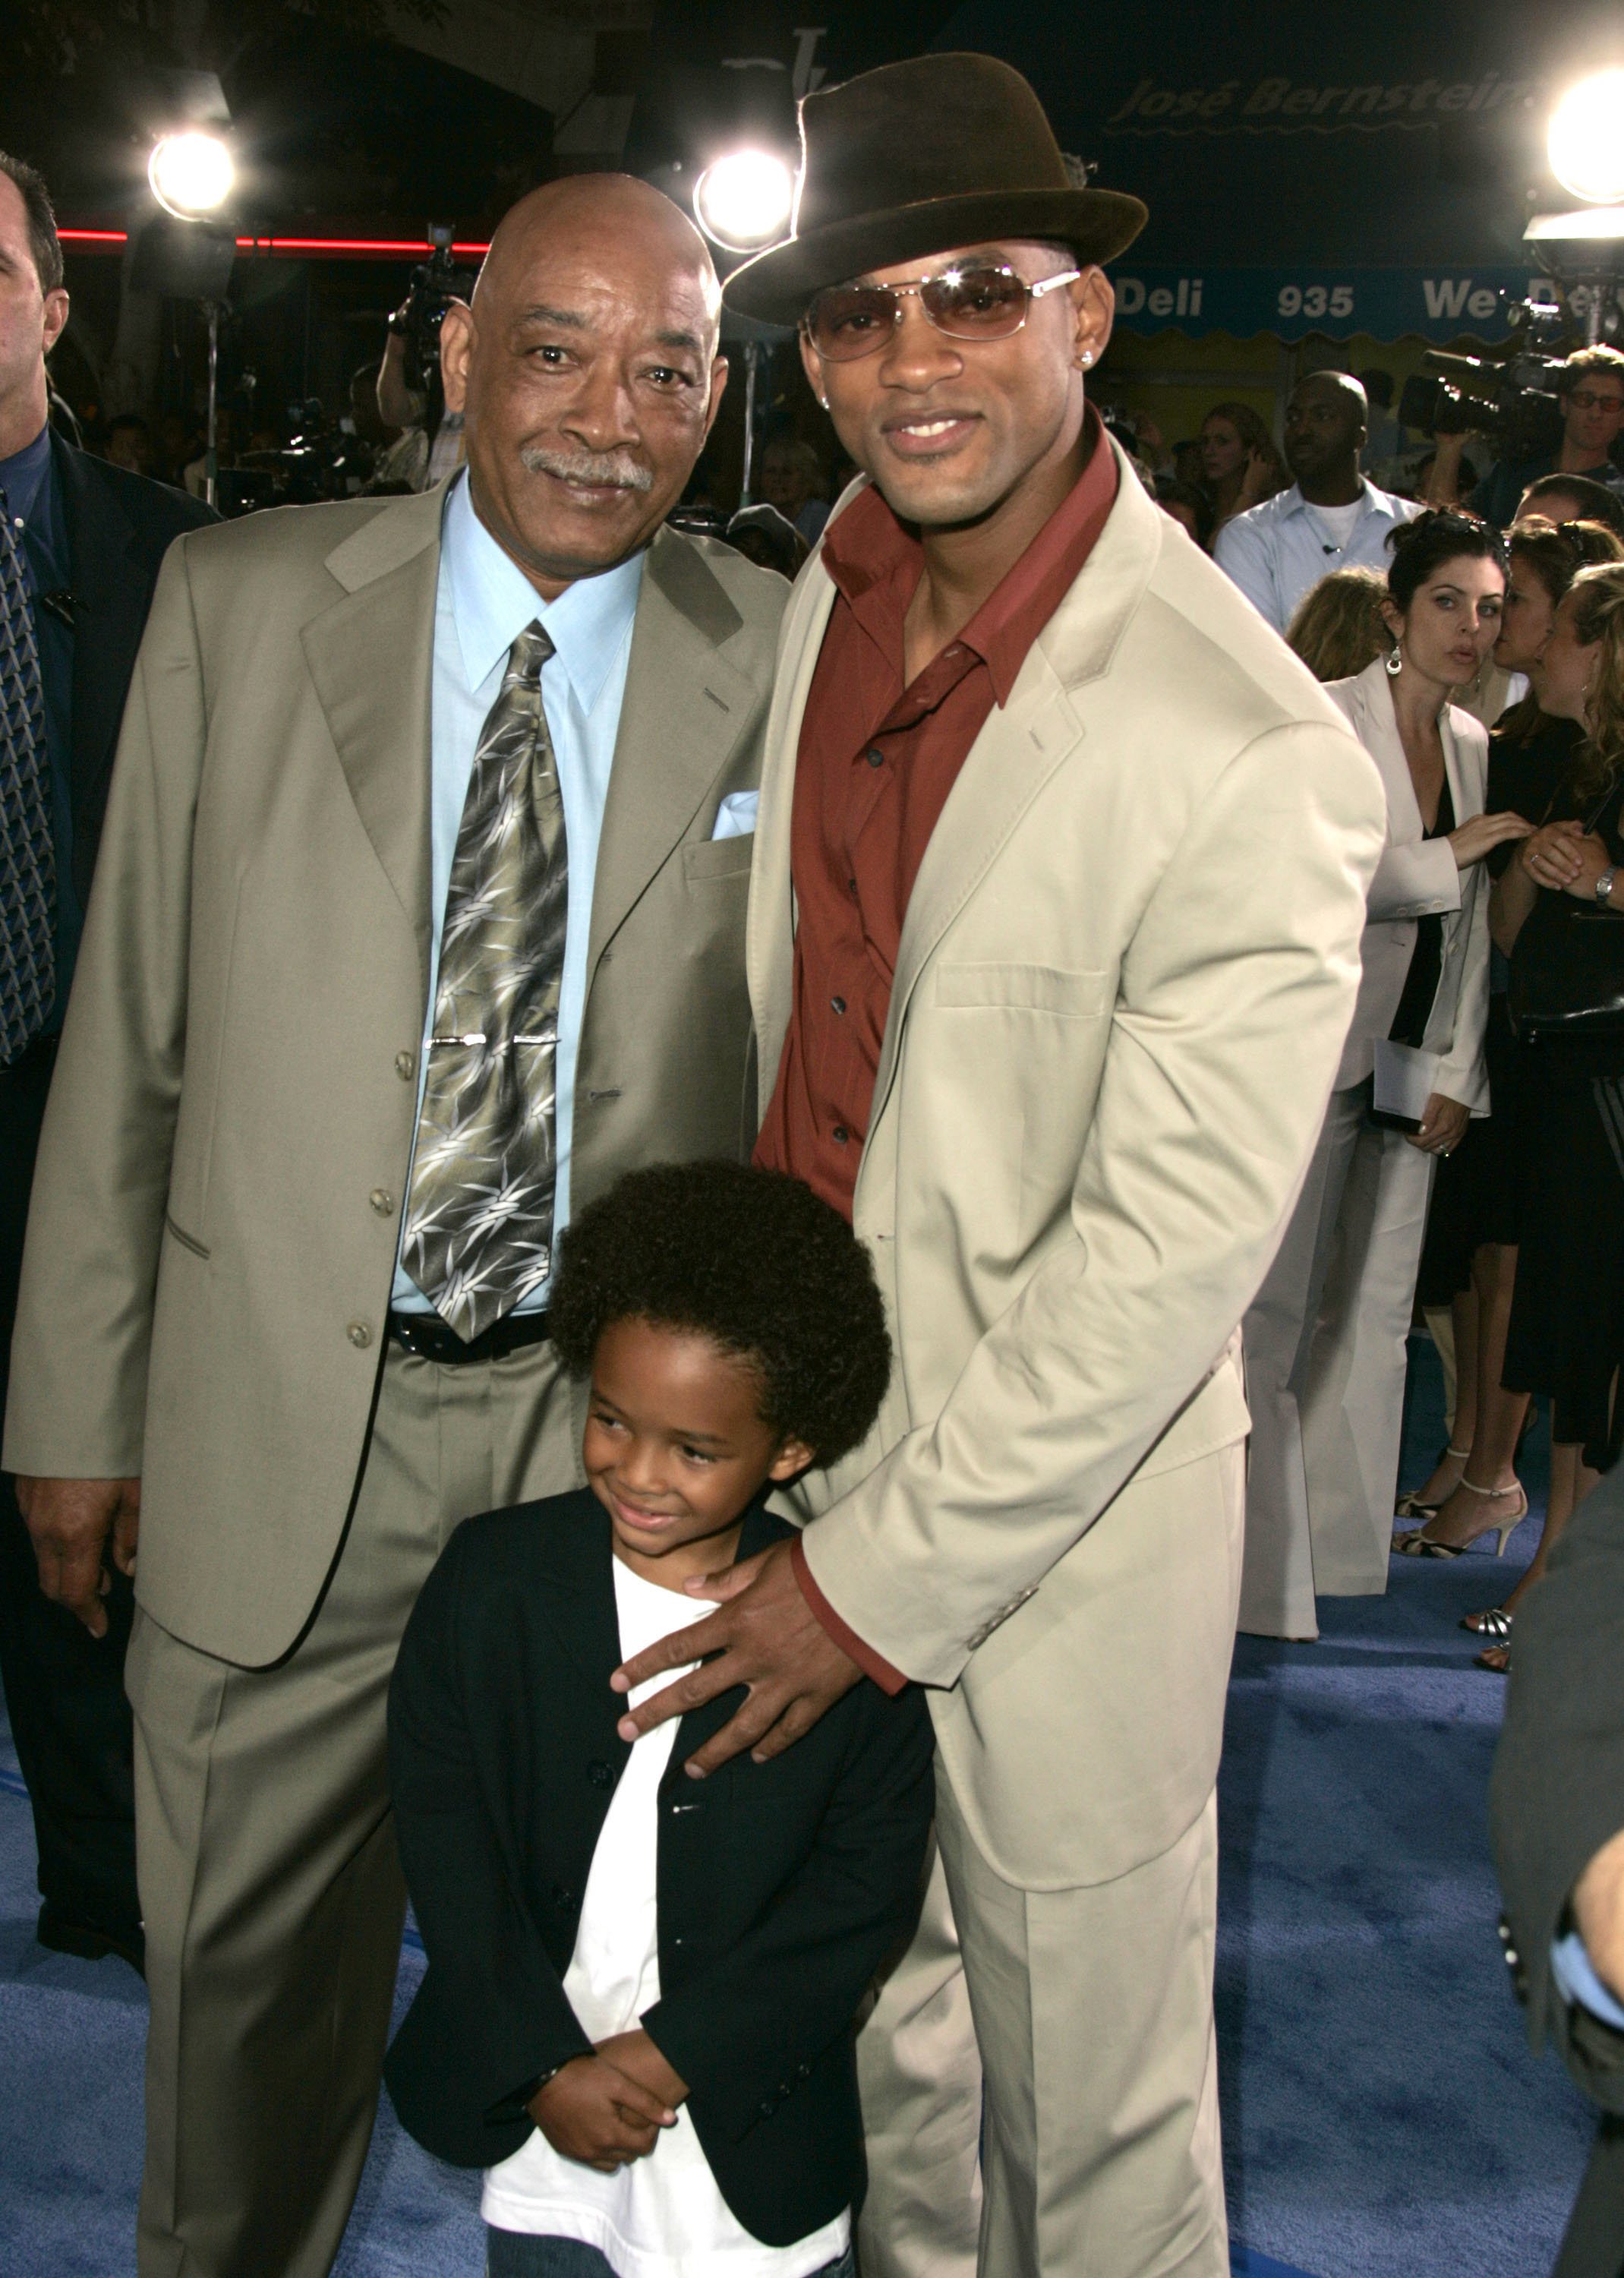 Willard Smith, Jaden Smith, and Will Smith at the Mann Village Theater in Westwood, California, on July 7, 2004. | Source: Steve Granitz/WireImage/Getty Images